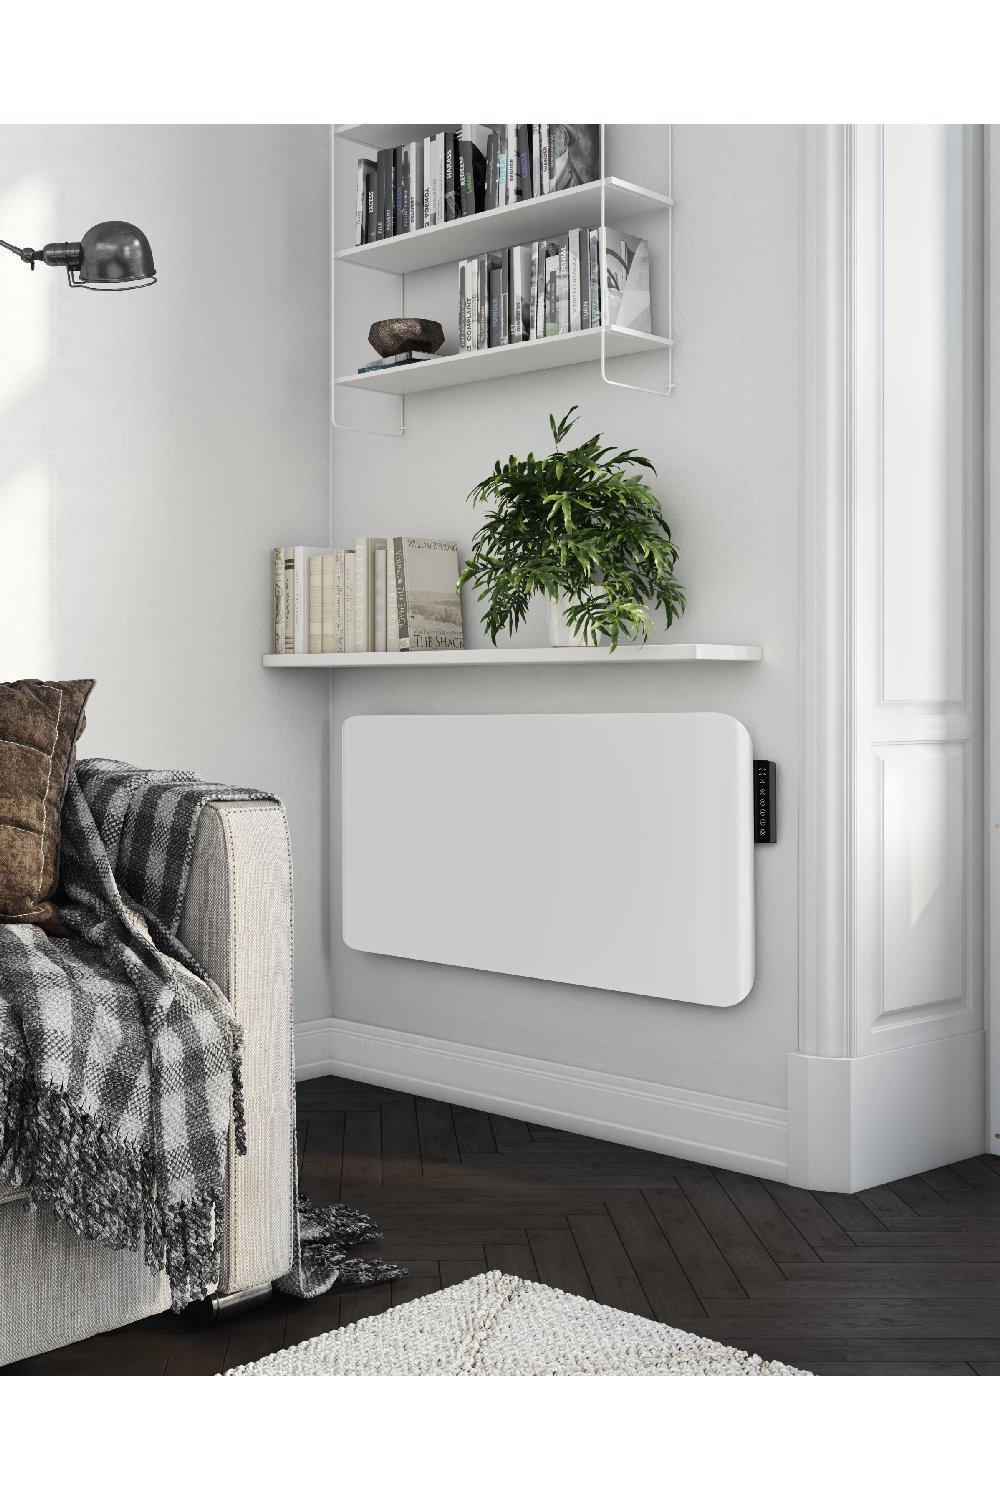 Zora - Convector Panel Heater with WiFi- 2000W